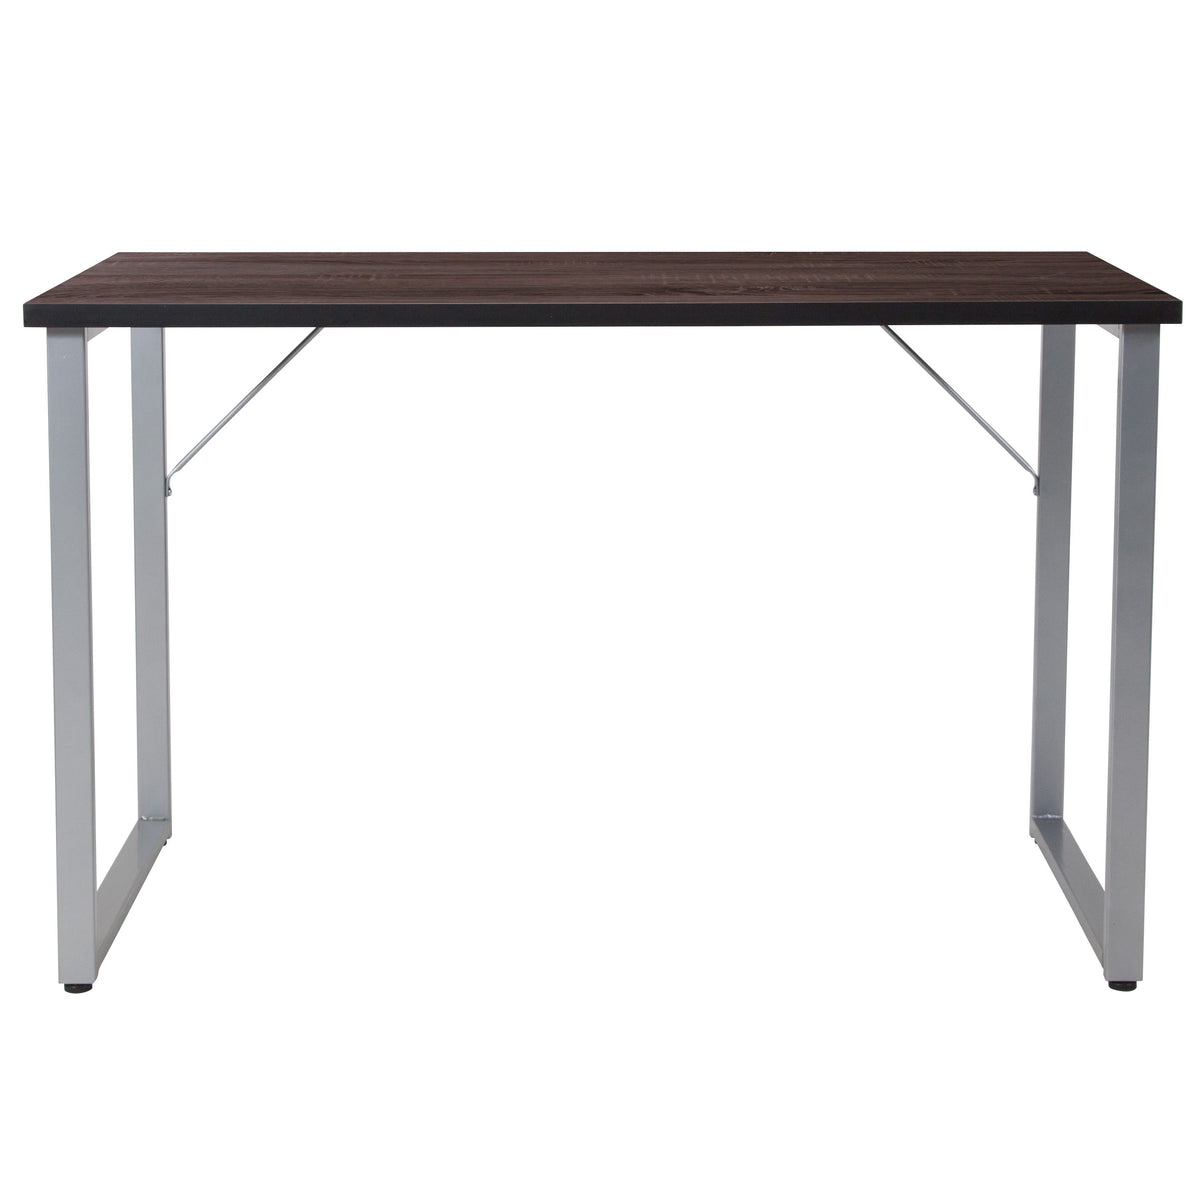 Black Finish Computer Desk with Silver Metal Frame - Home Office Furniture